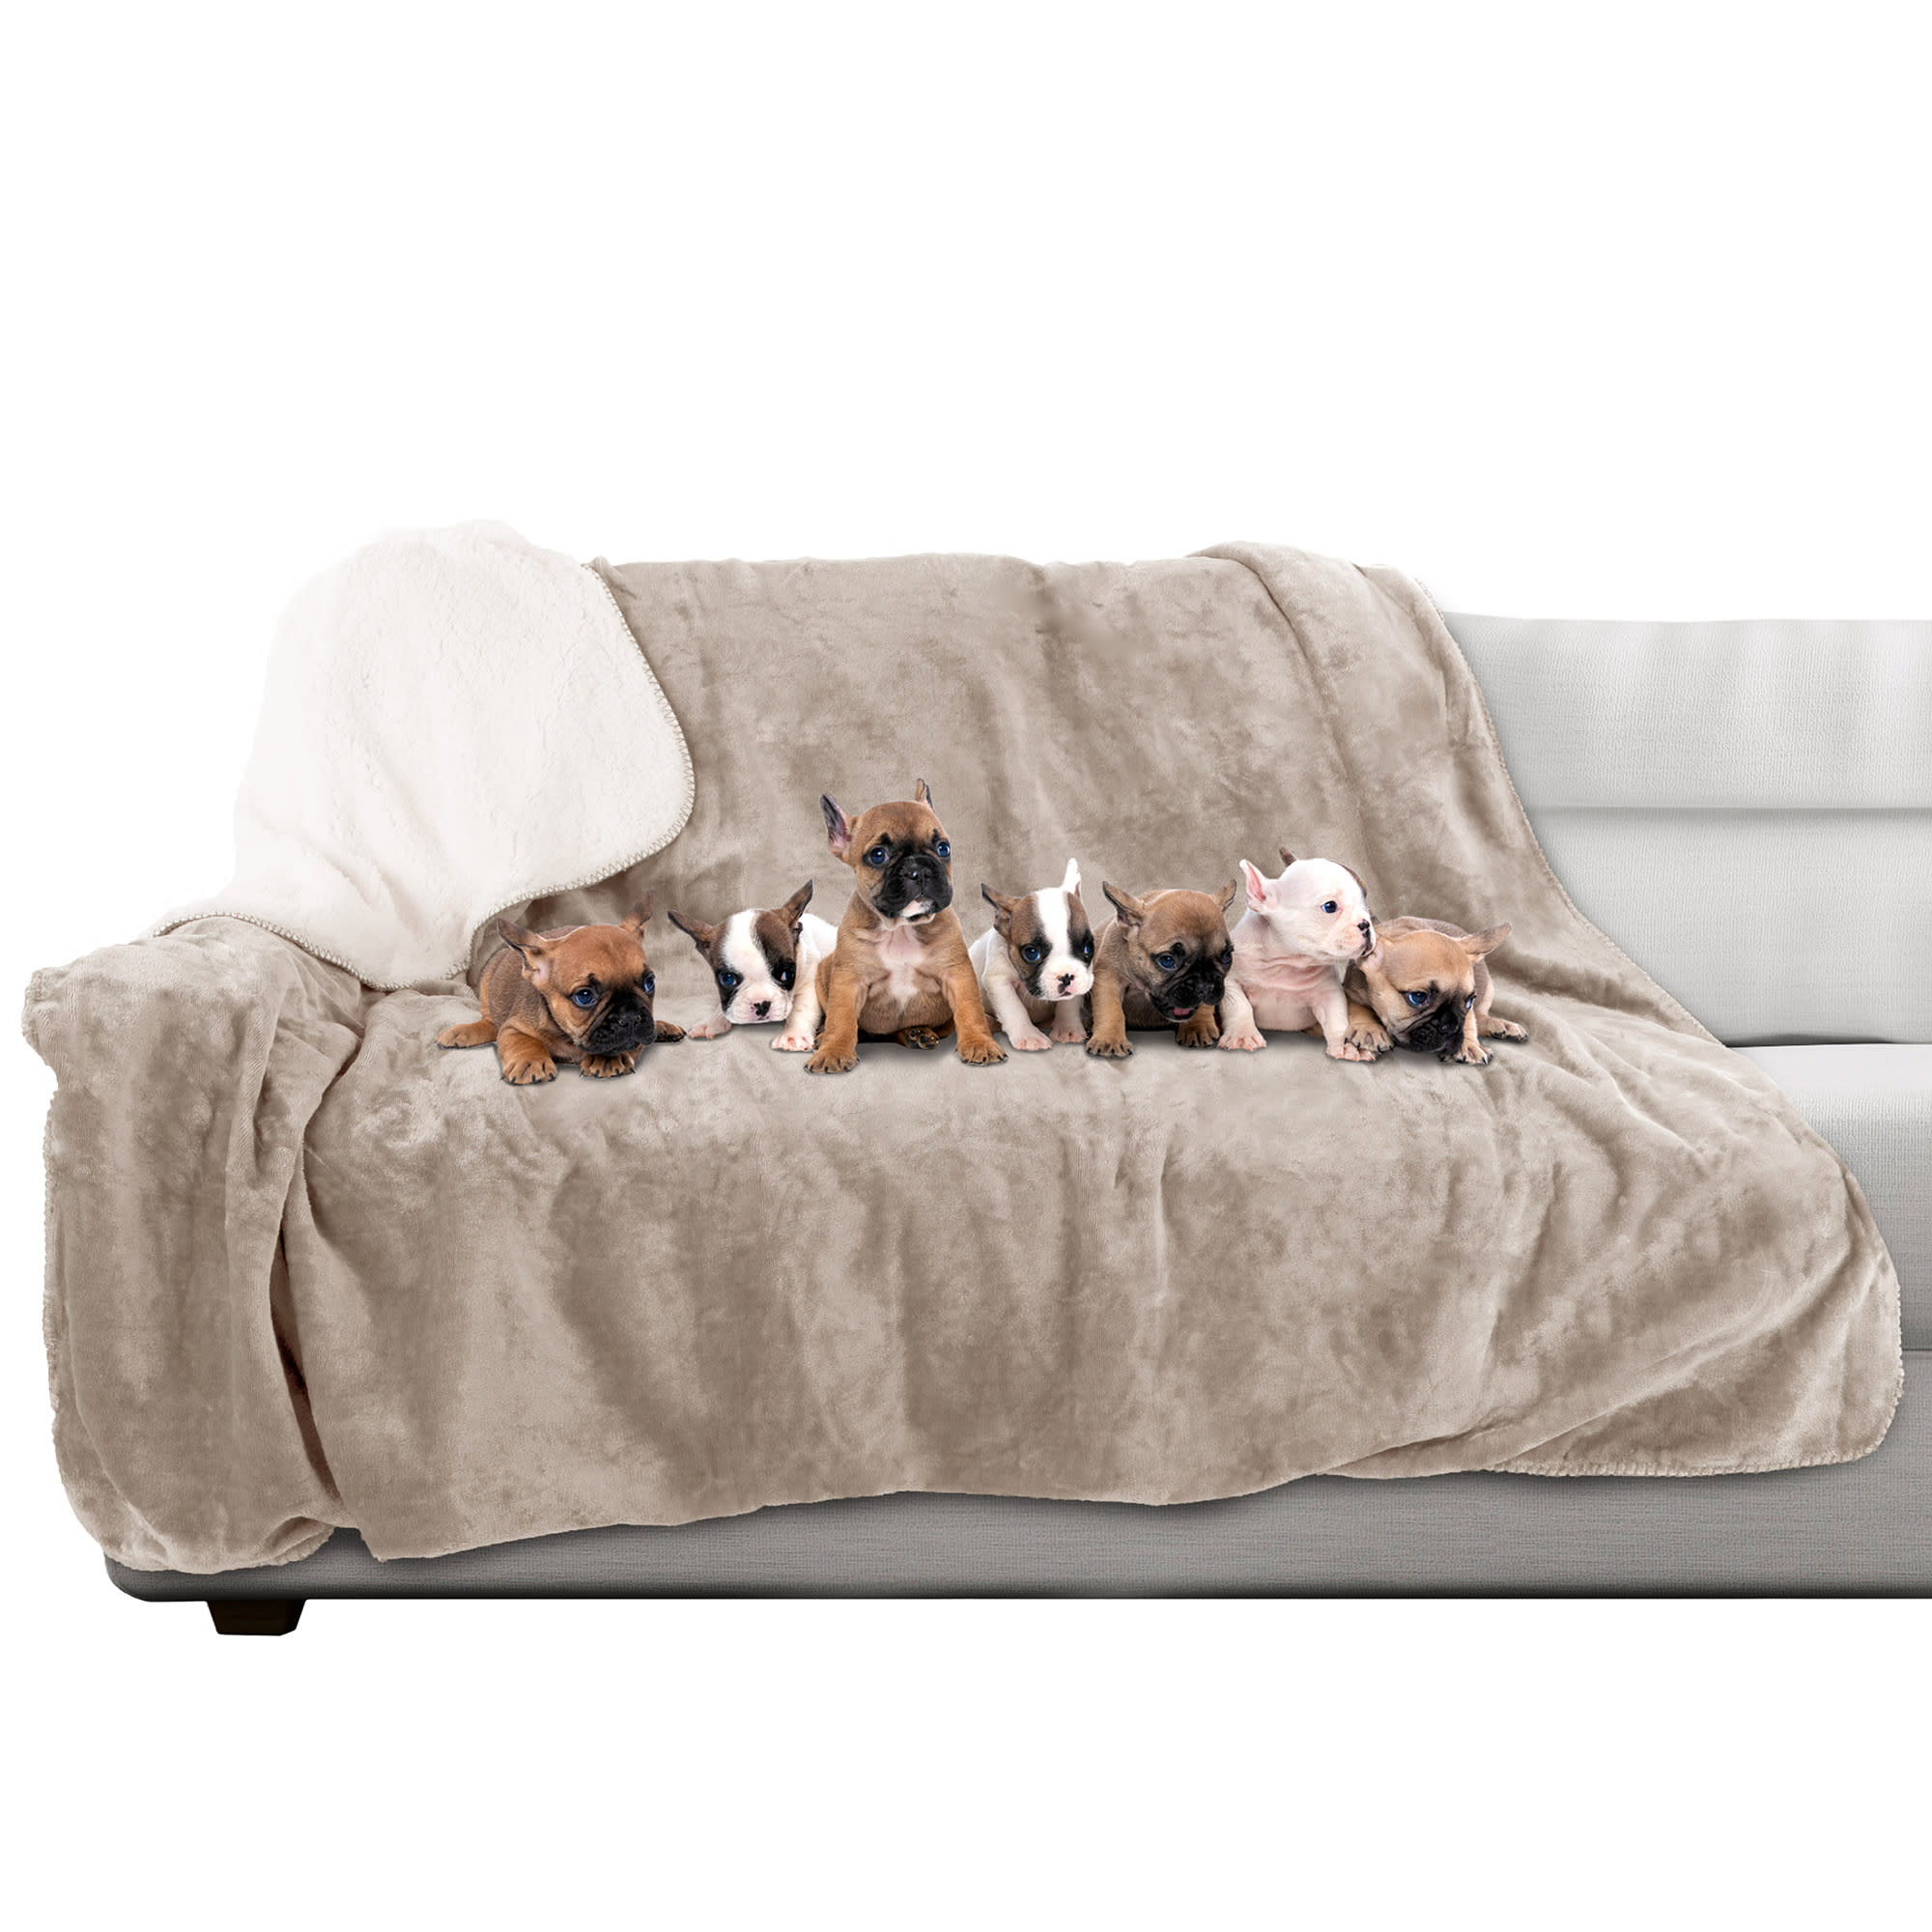 Friends Forever Durable Dog Blanket for Couch Protection